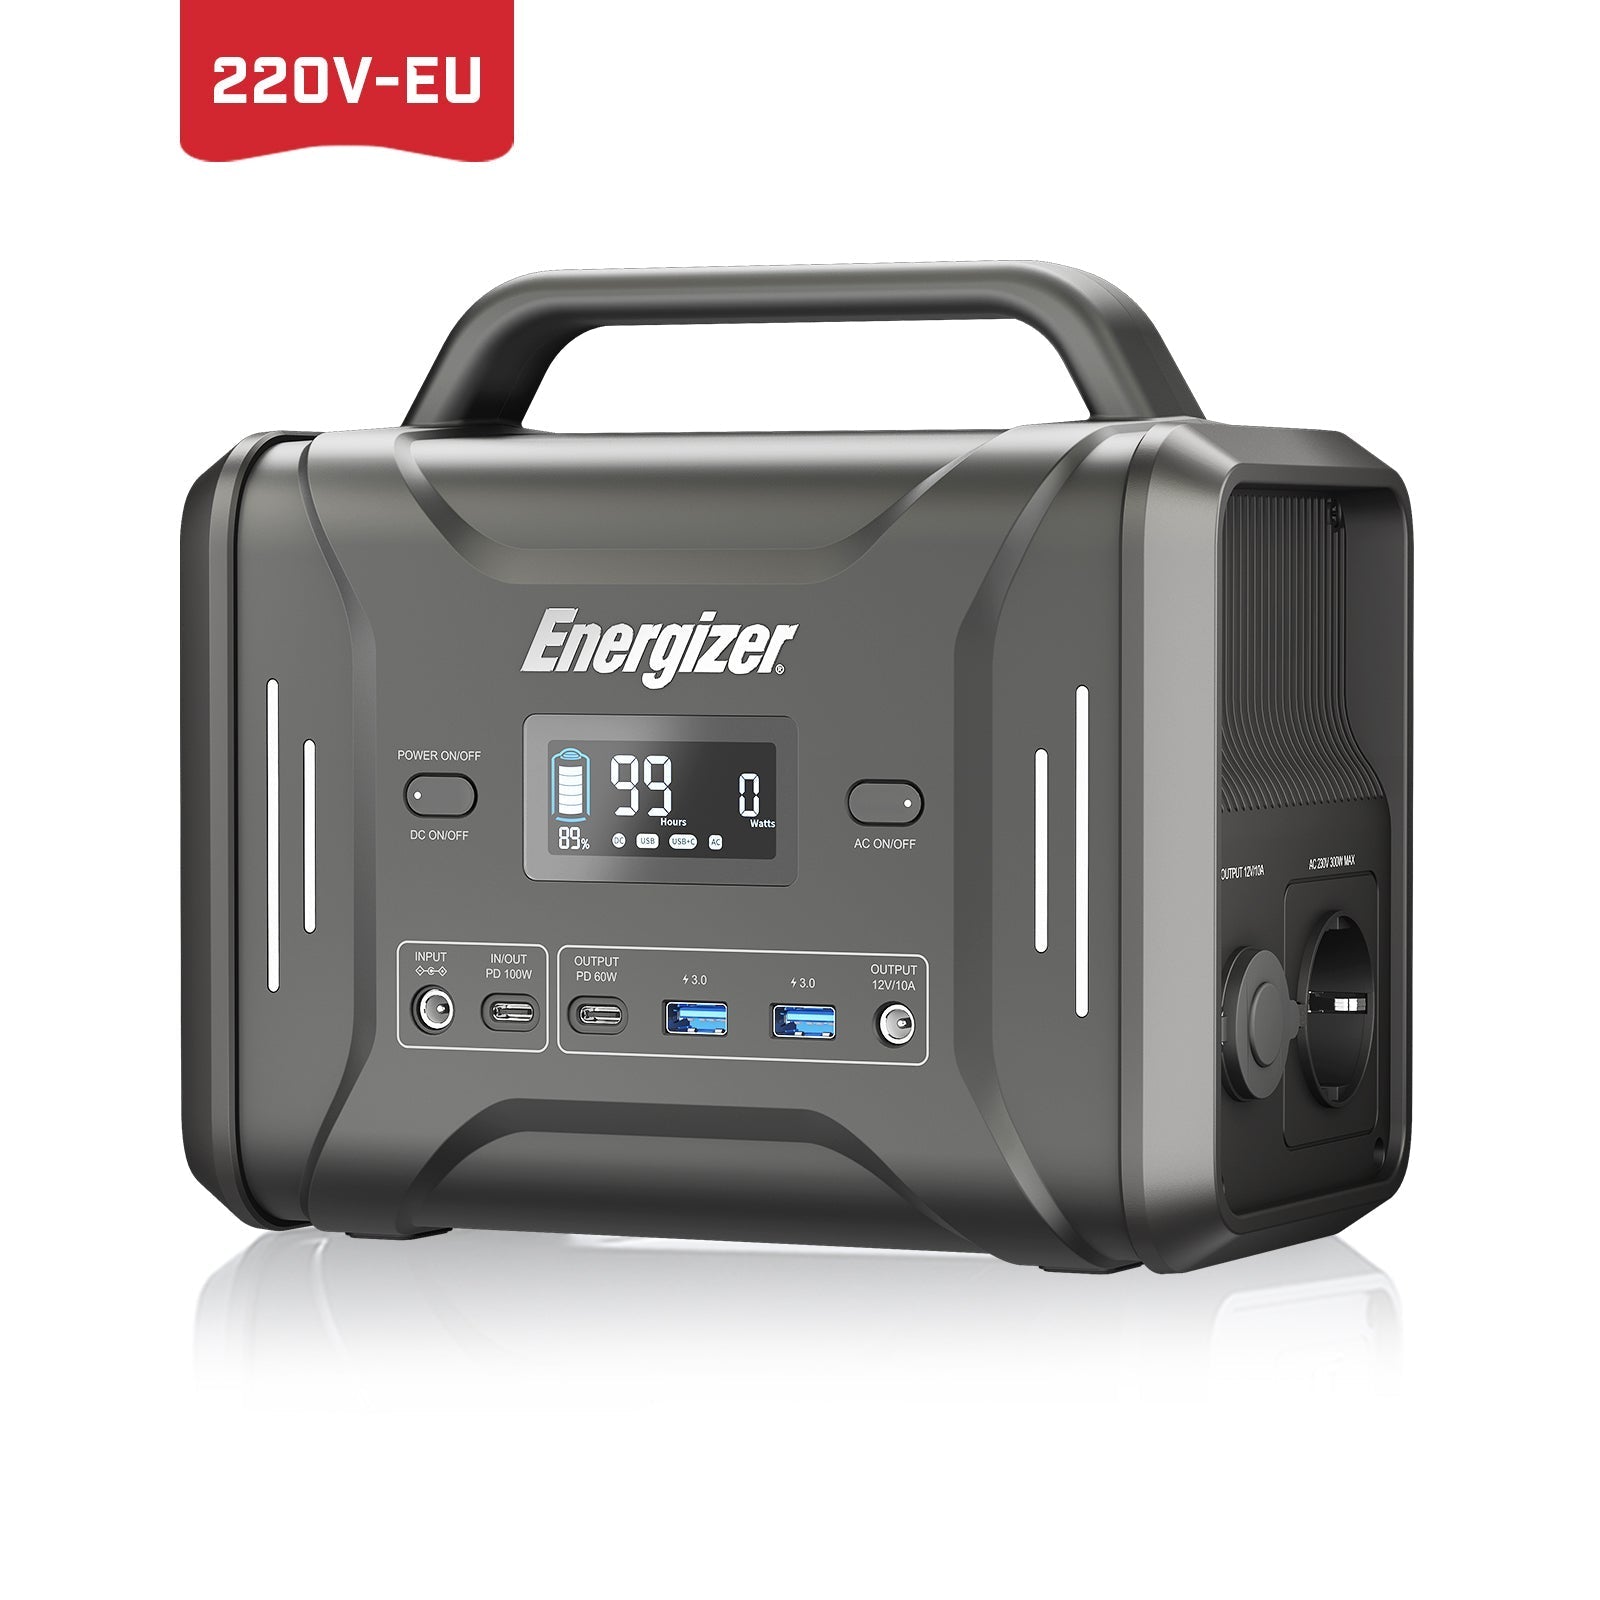 Europe Energizer PPS320 Portable Power Station